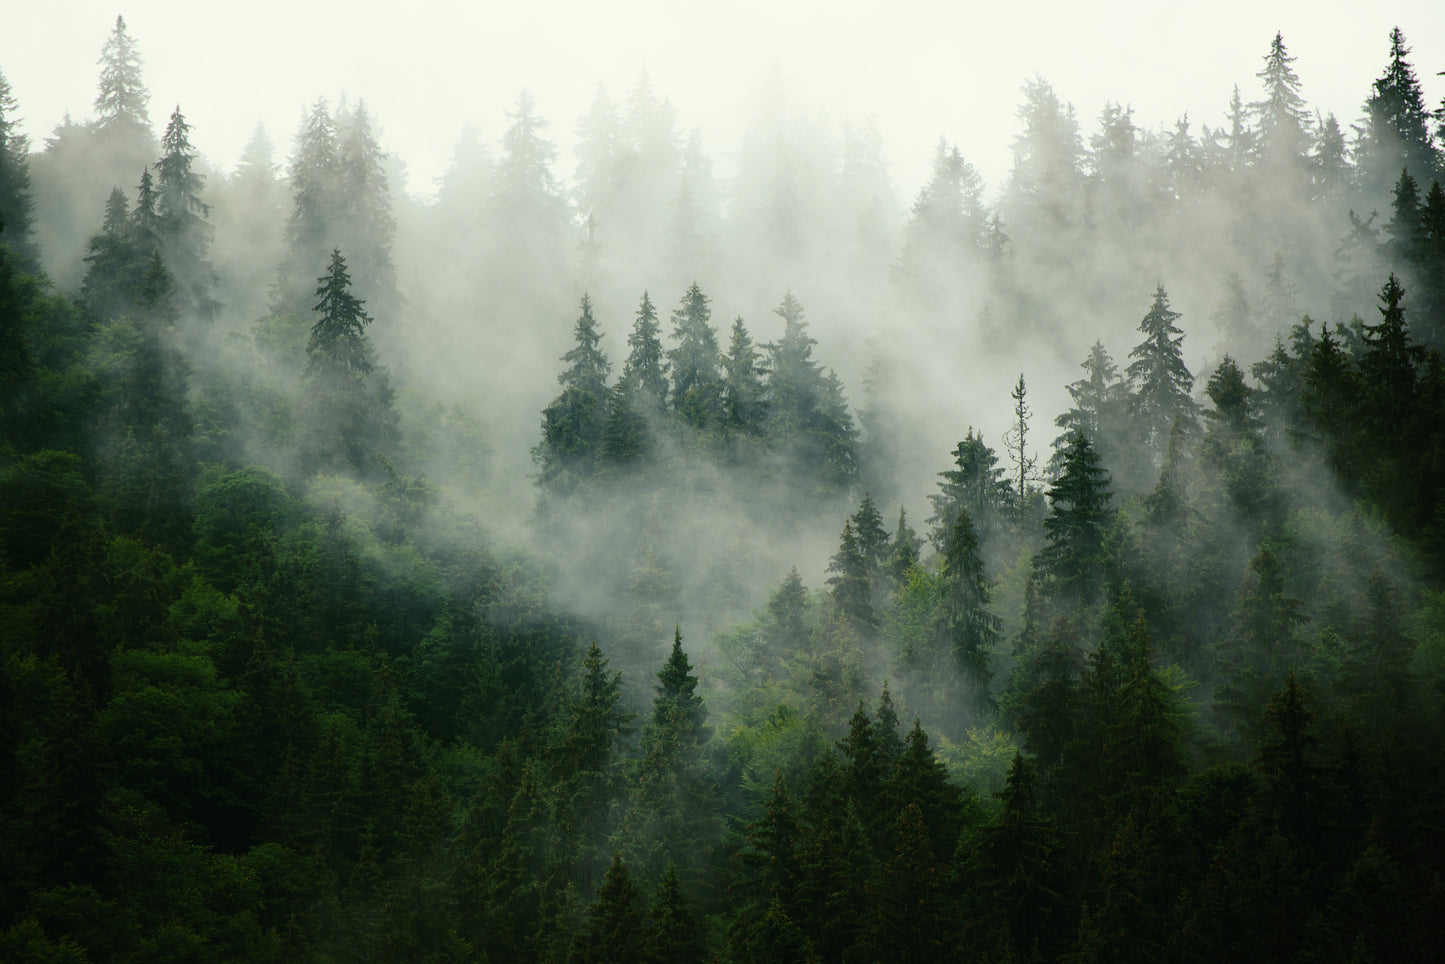 A forest of evergreen trees